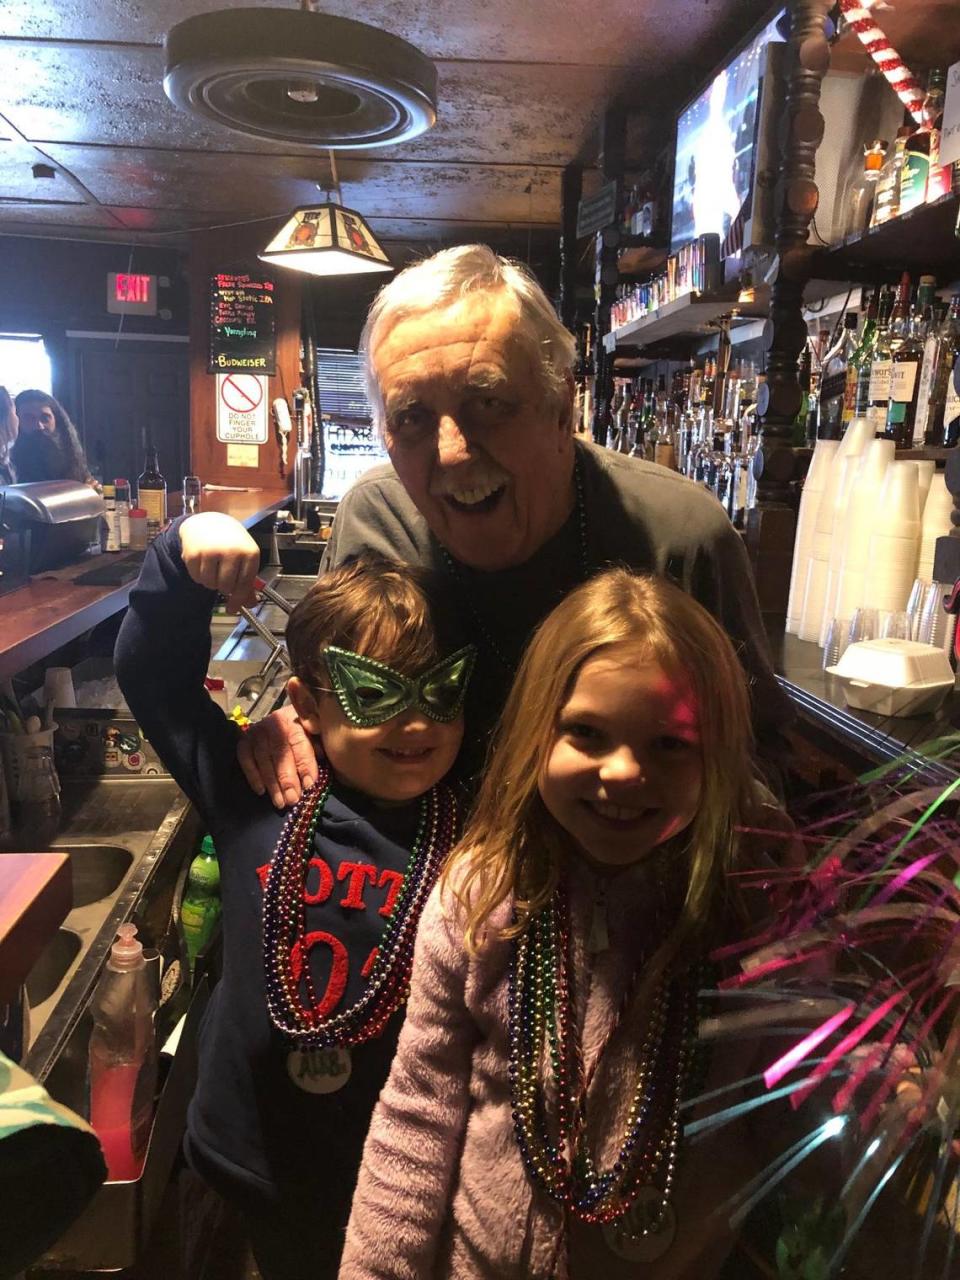 Russell “Redeye” Salyer was a longtime bartender at Chevy Chase Inn and a “bonus grandfather” to the bar owners’ children Herrington and Stella Heathcoat. Salyer helped Stella with a Little Free Library modeled after the bar that will be placed there on Euclid in his honor.